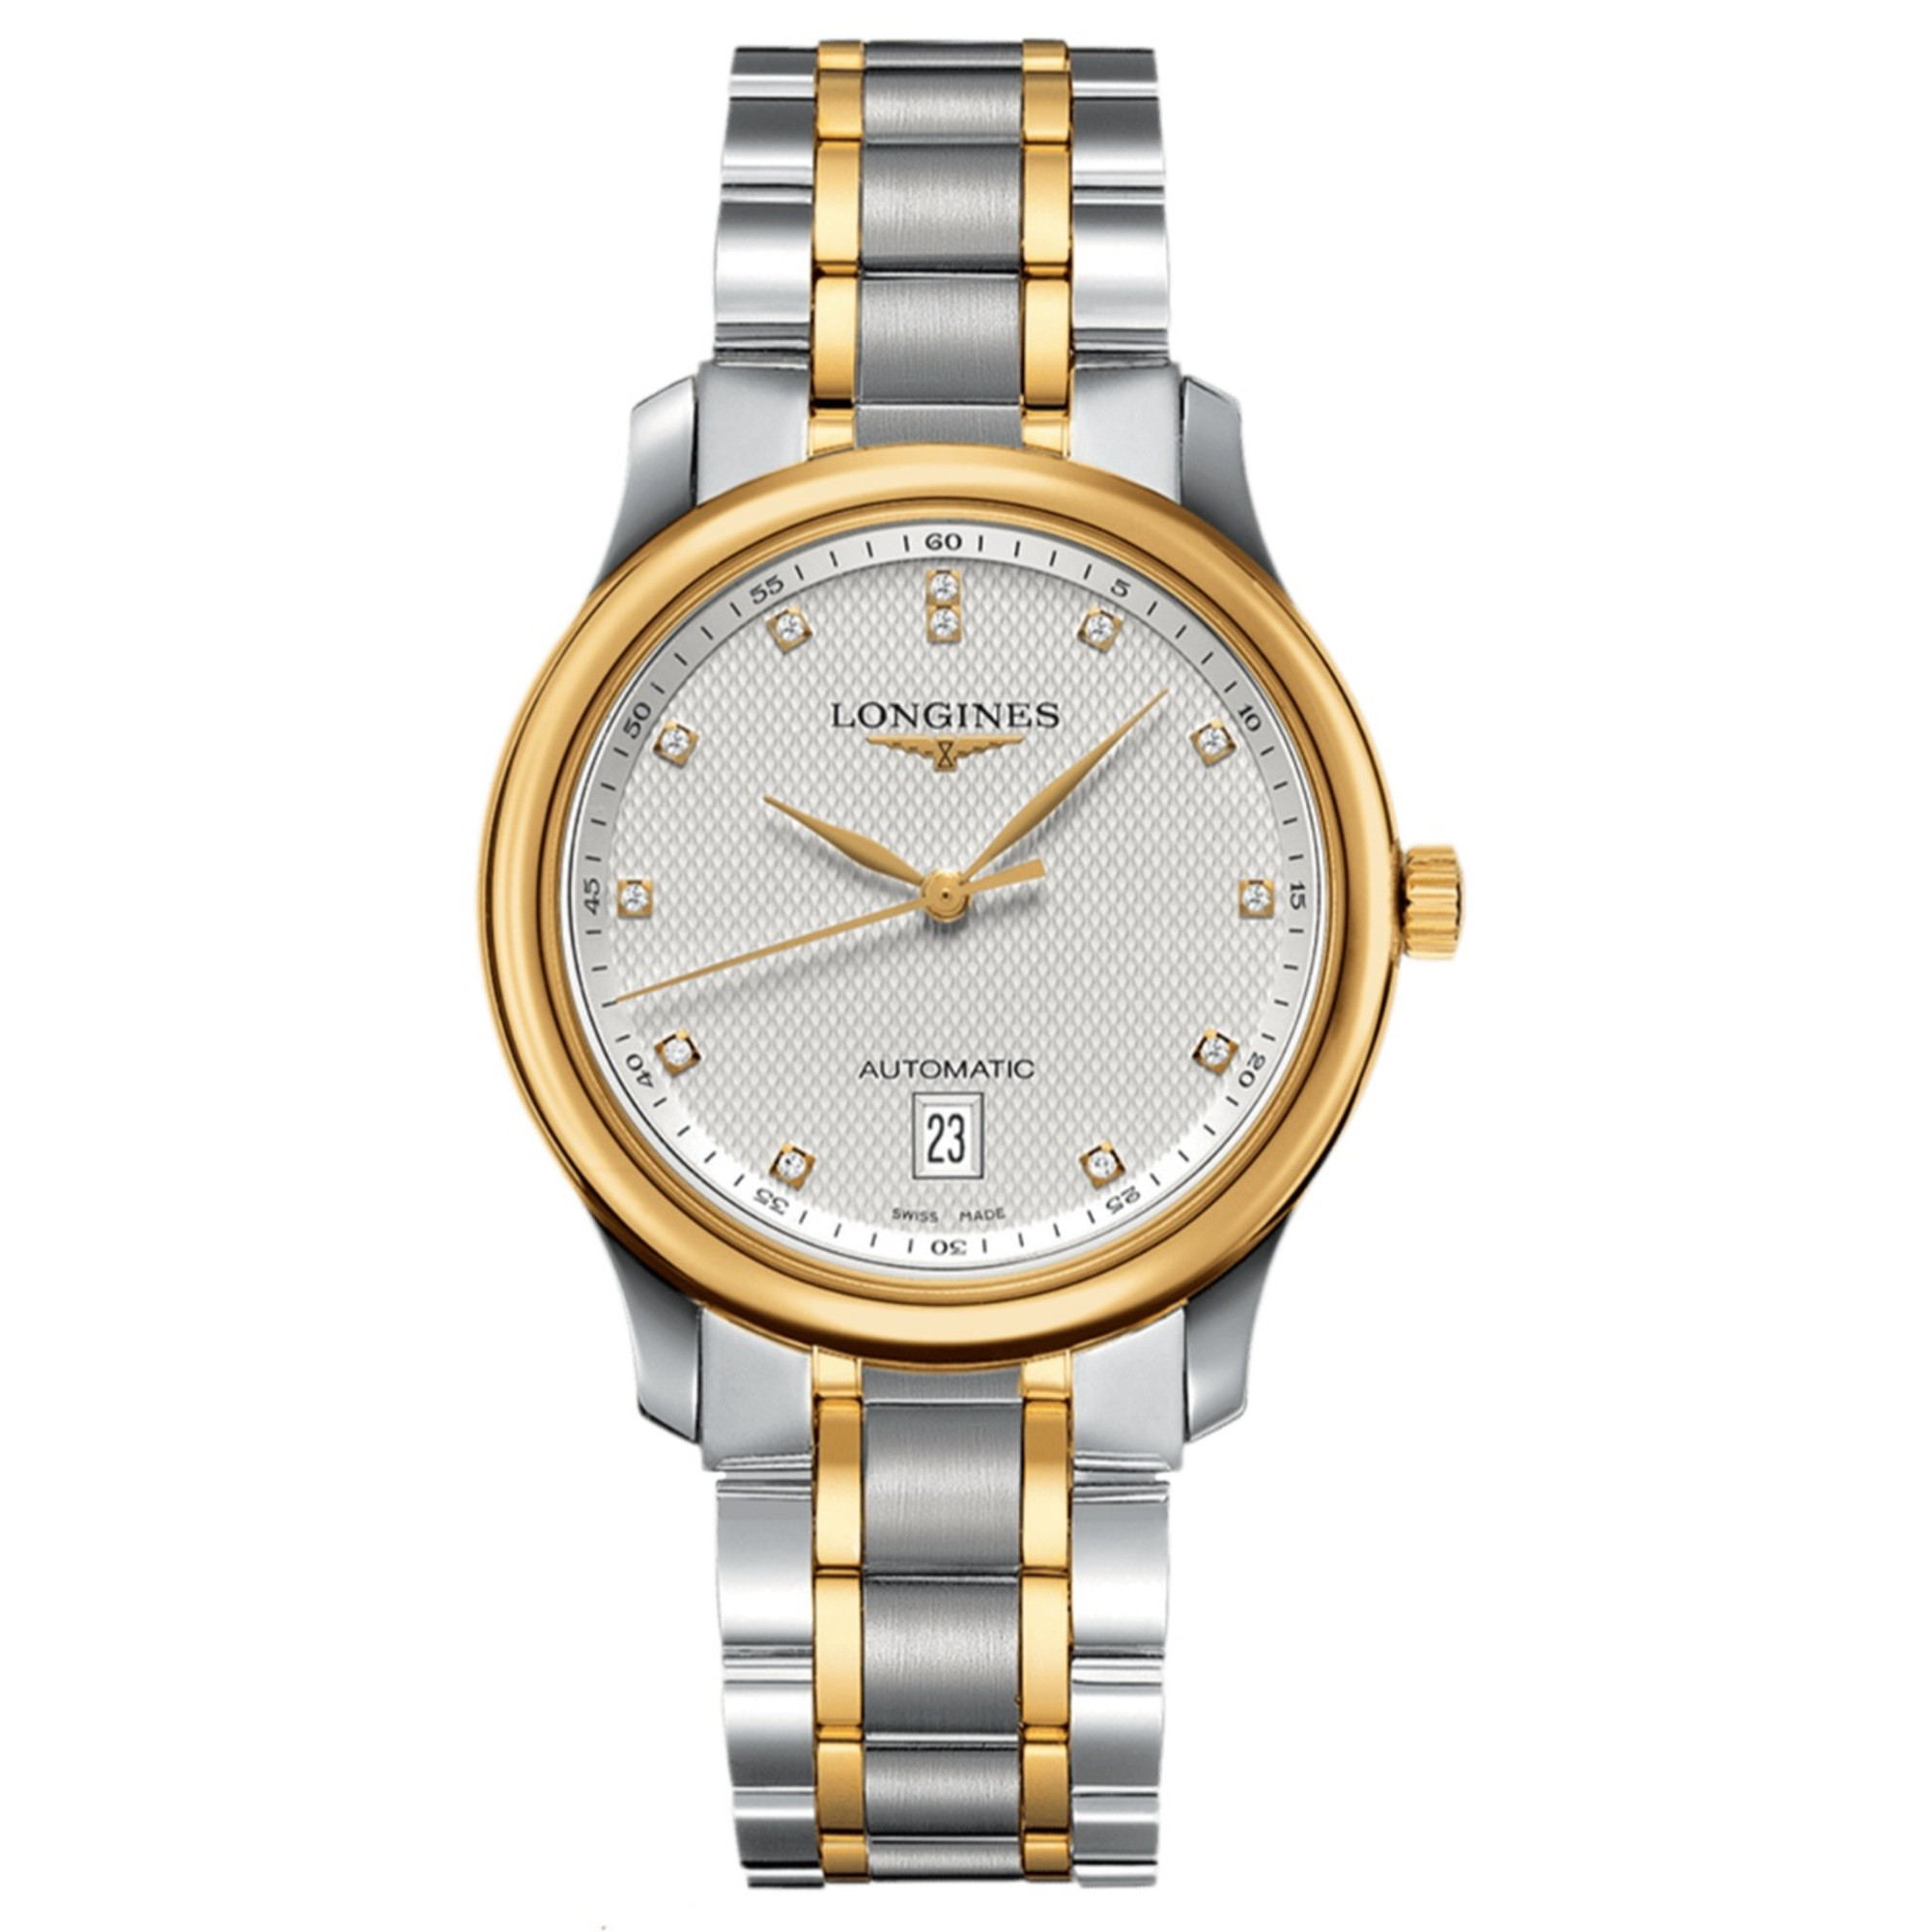 New Longines Master Silver Dial Yellow Gold on Bracelet